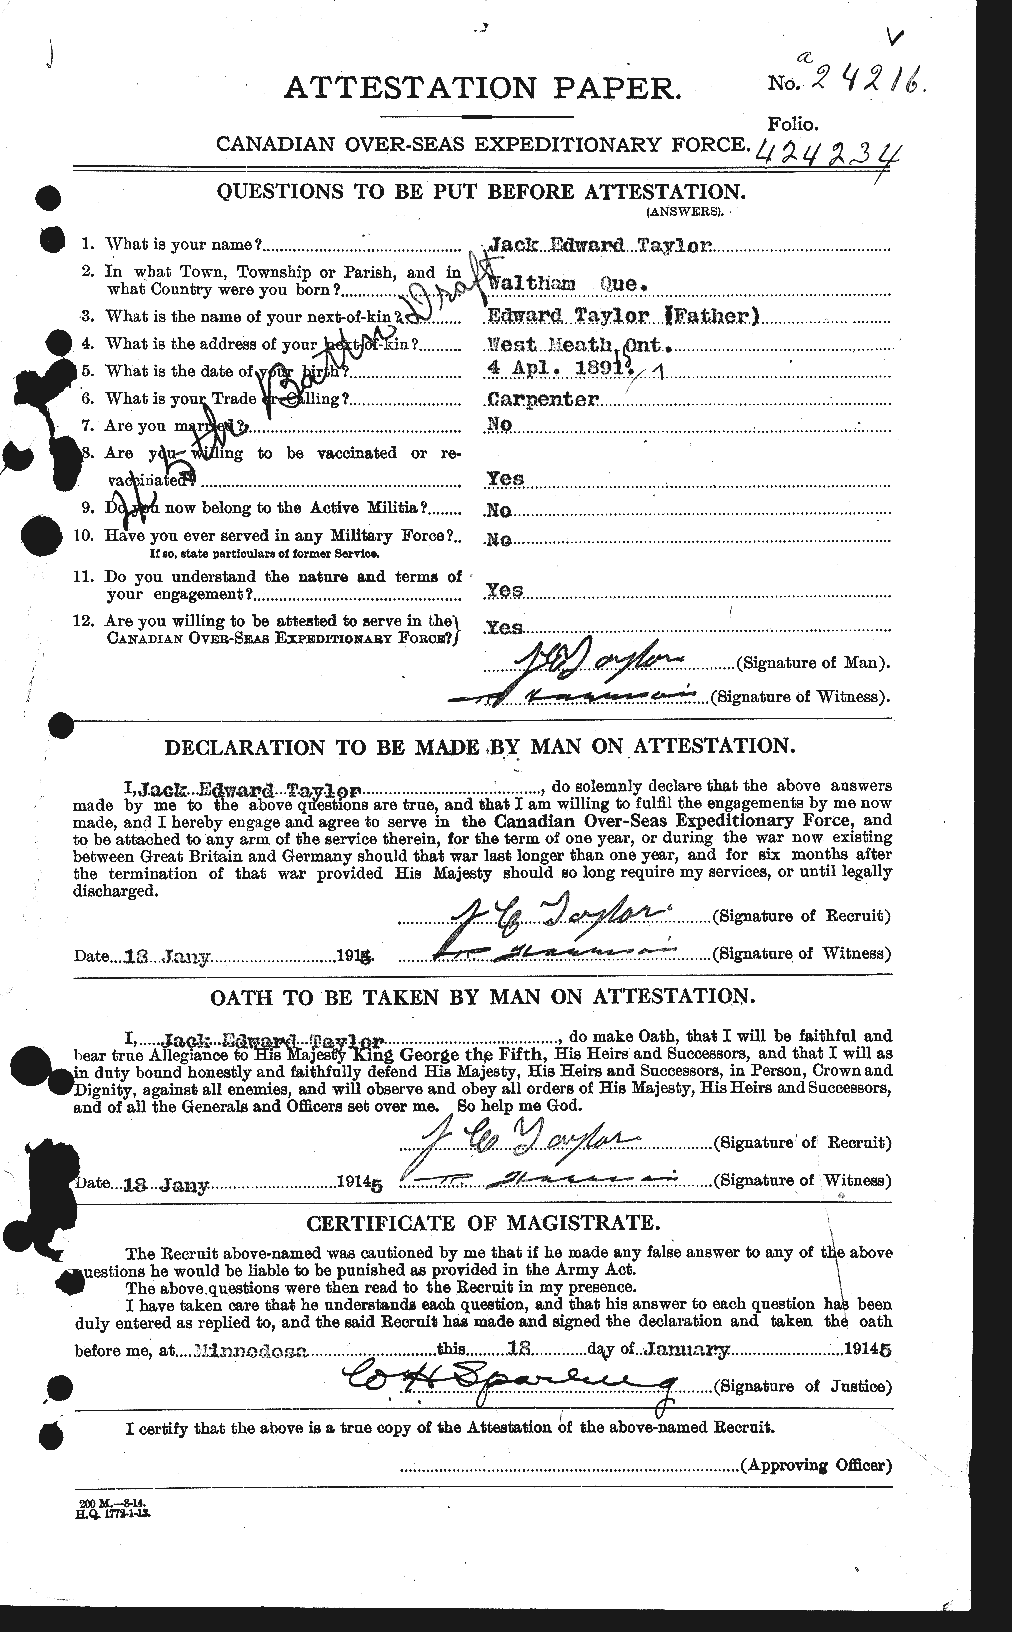 Personnel Records of the First World War - CEF 626644a